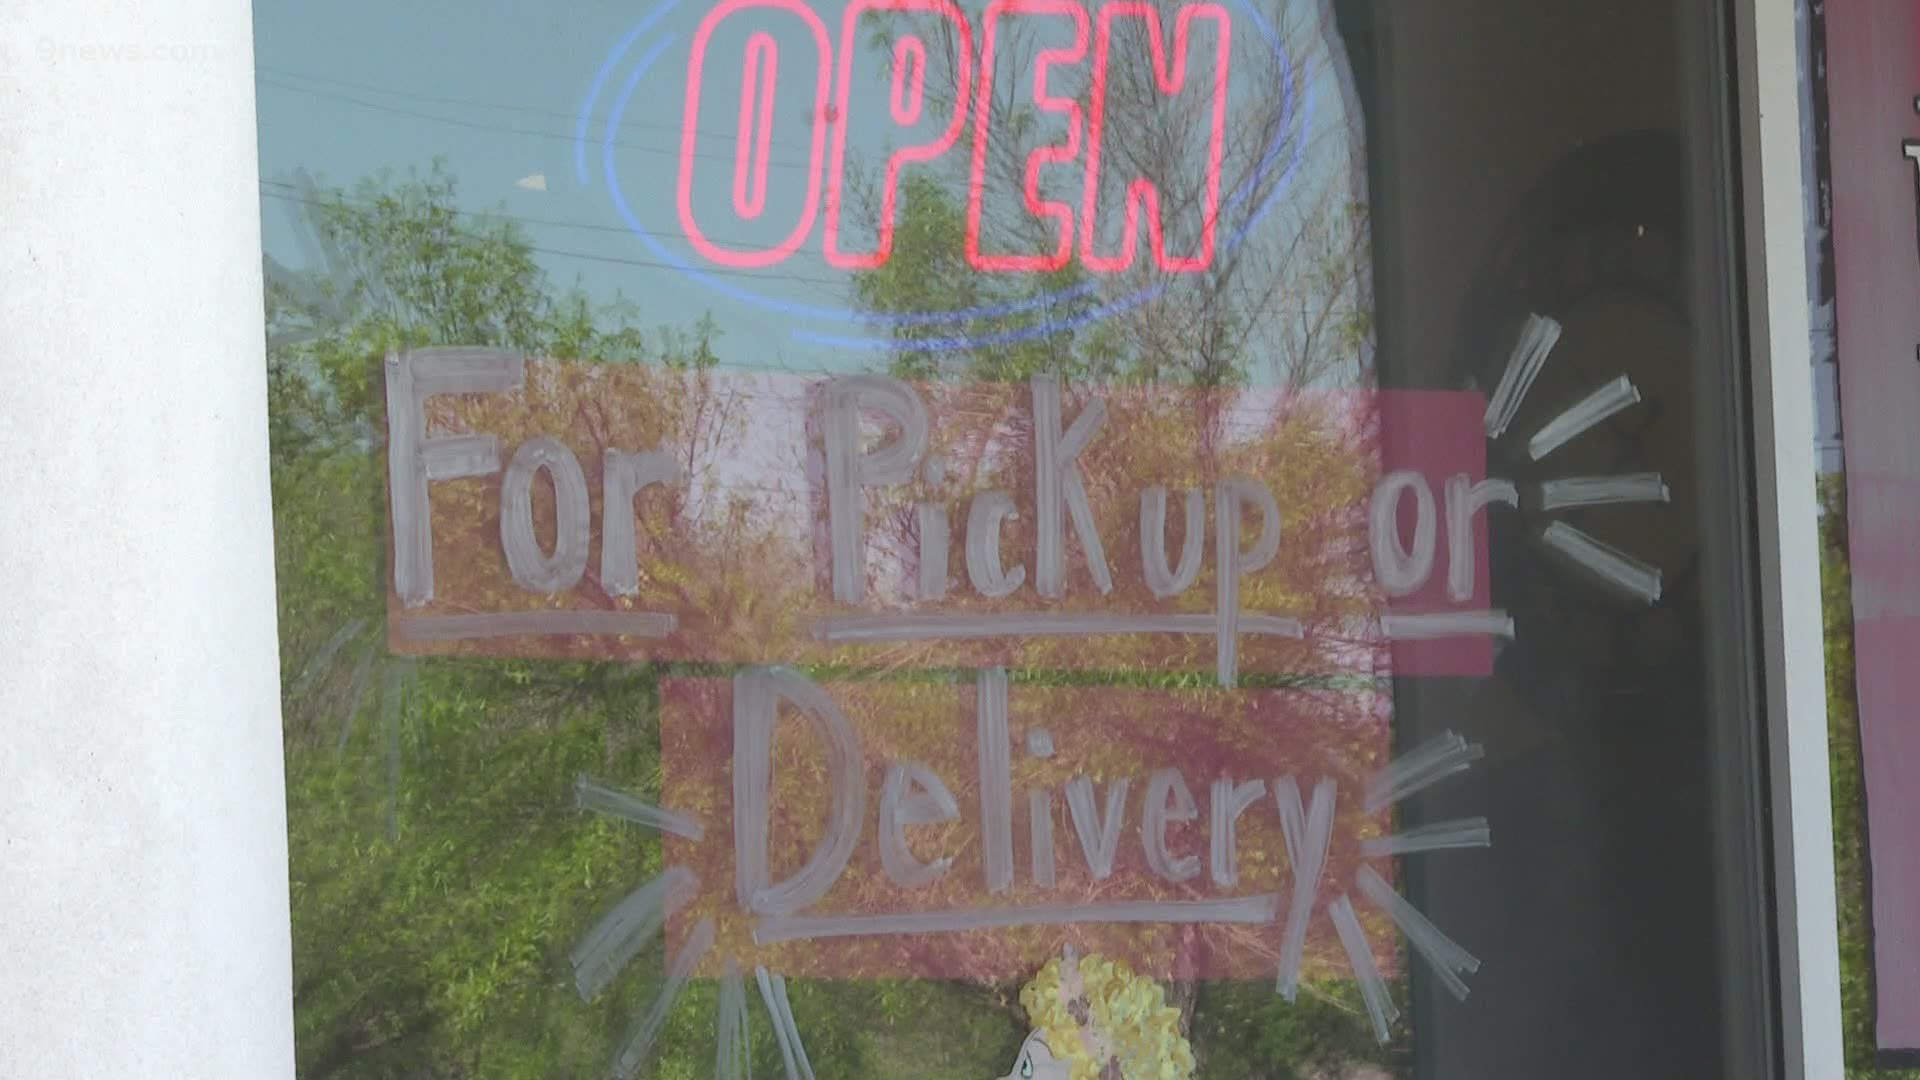 Parts of the state reopened for retail today, Denver and surrounding counties will lift their stay-at-home orders Friday.